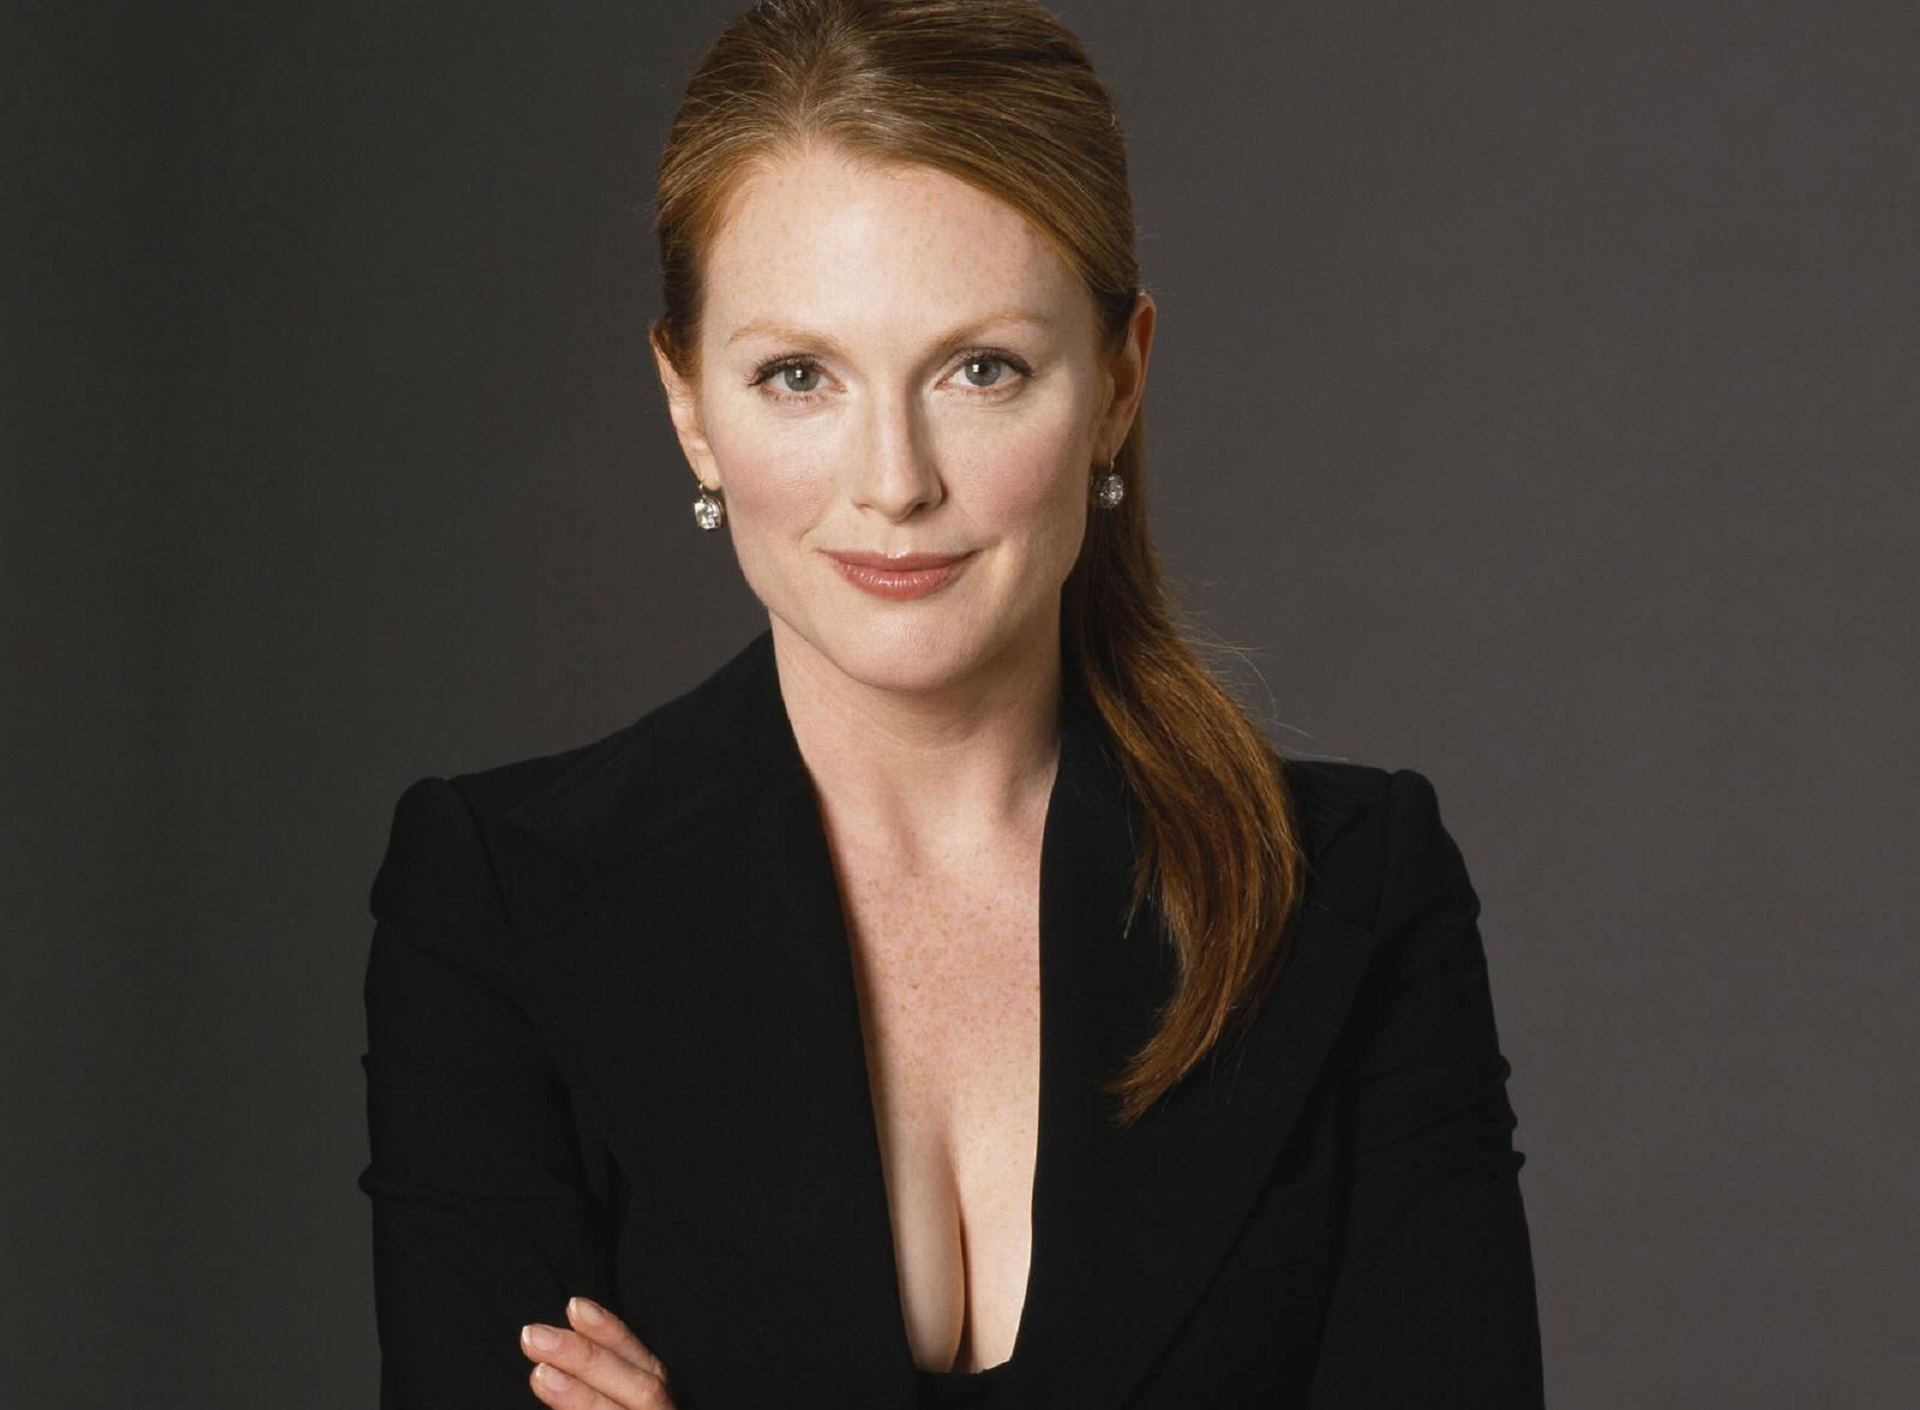 Julianne Moore Wallpaper Image Photos Pictures Background